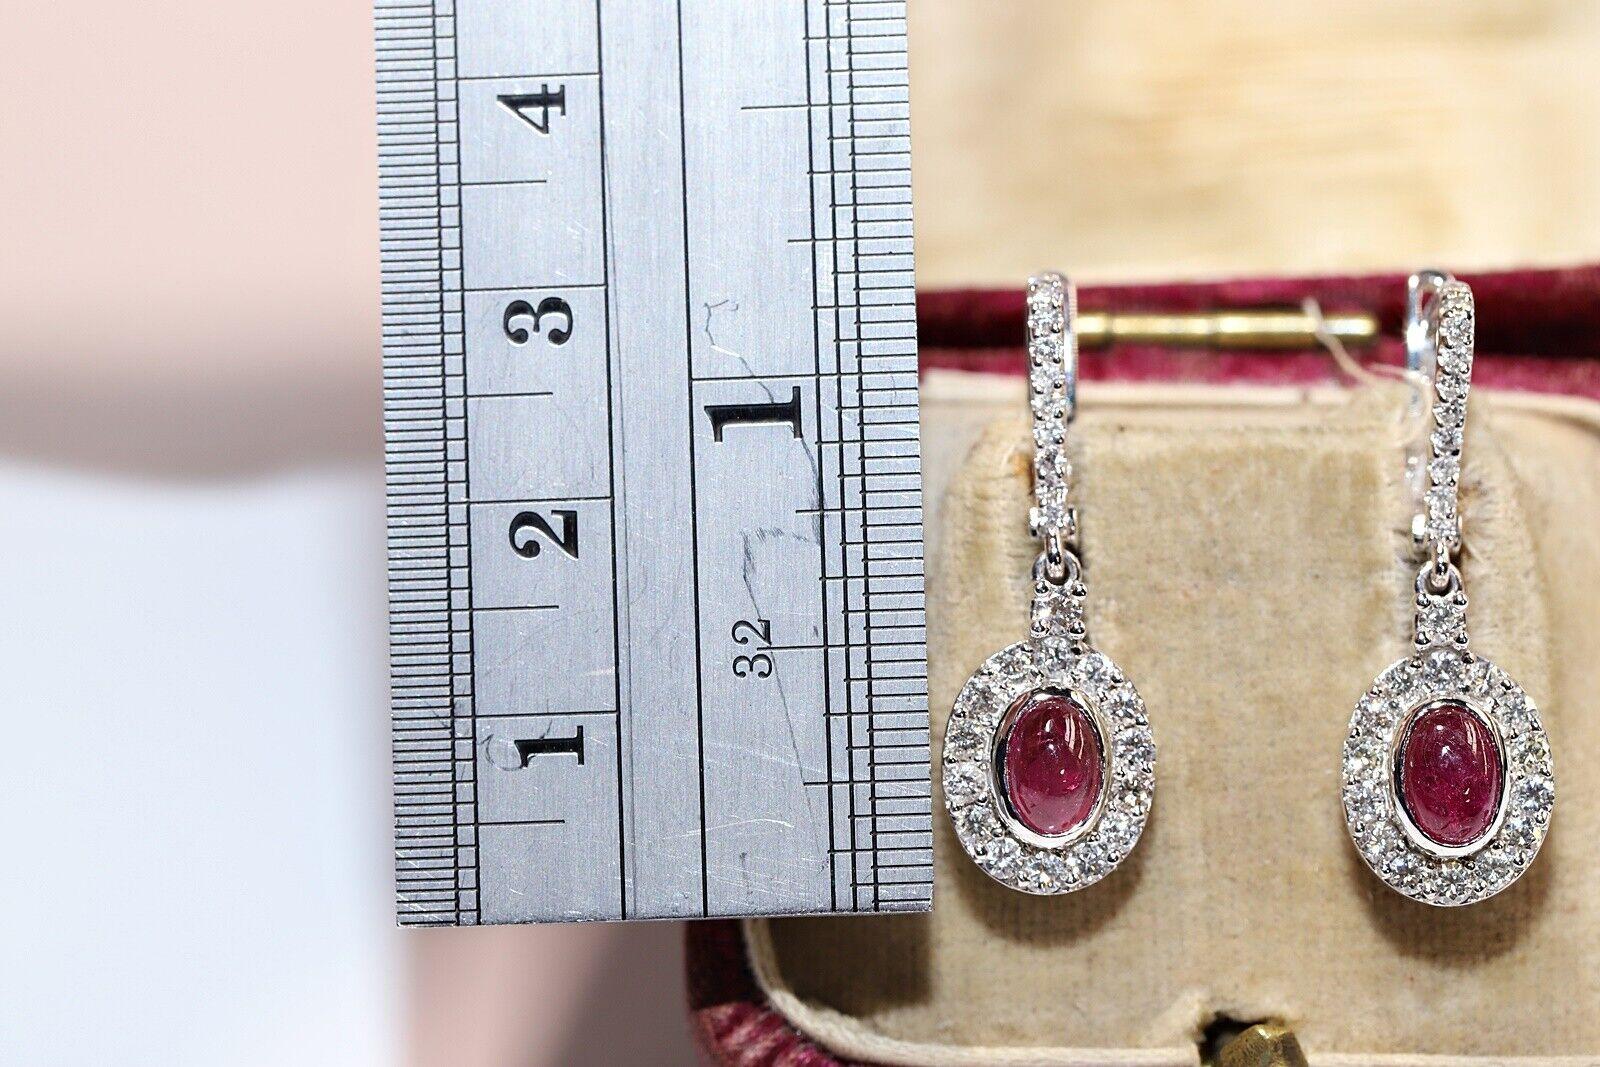 In very good conditions.
Total weight is 8 grams.
Totally is diamond 0.90 carat.
The diamond is has G-H color and vs-s1 clarity.
Totally is ruby 1.25 carat.
Box is not included.
Please contact for any questions.